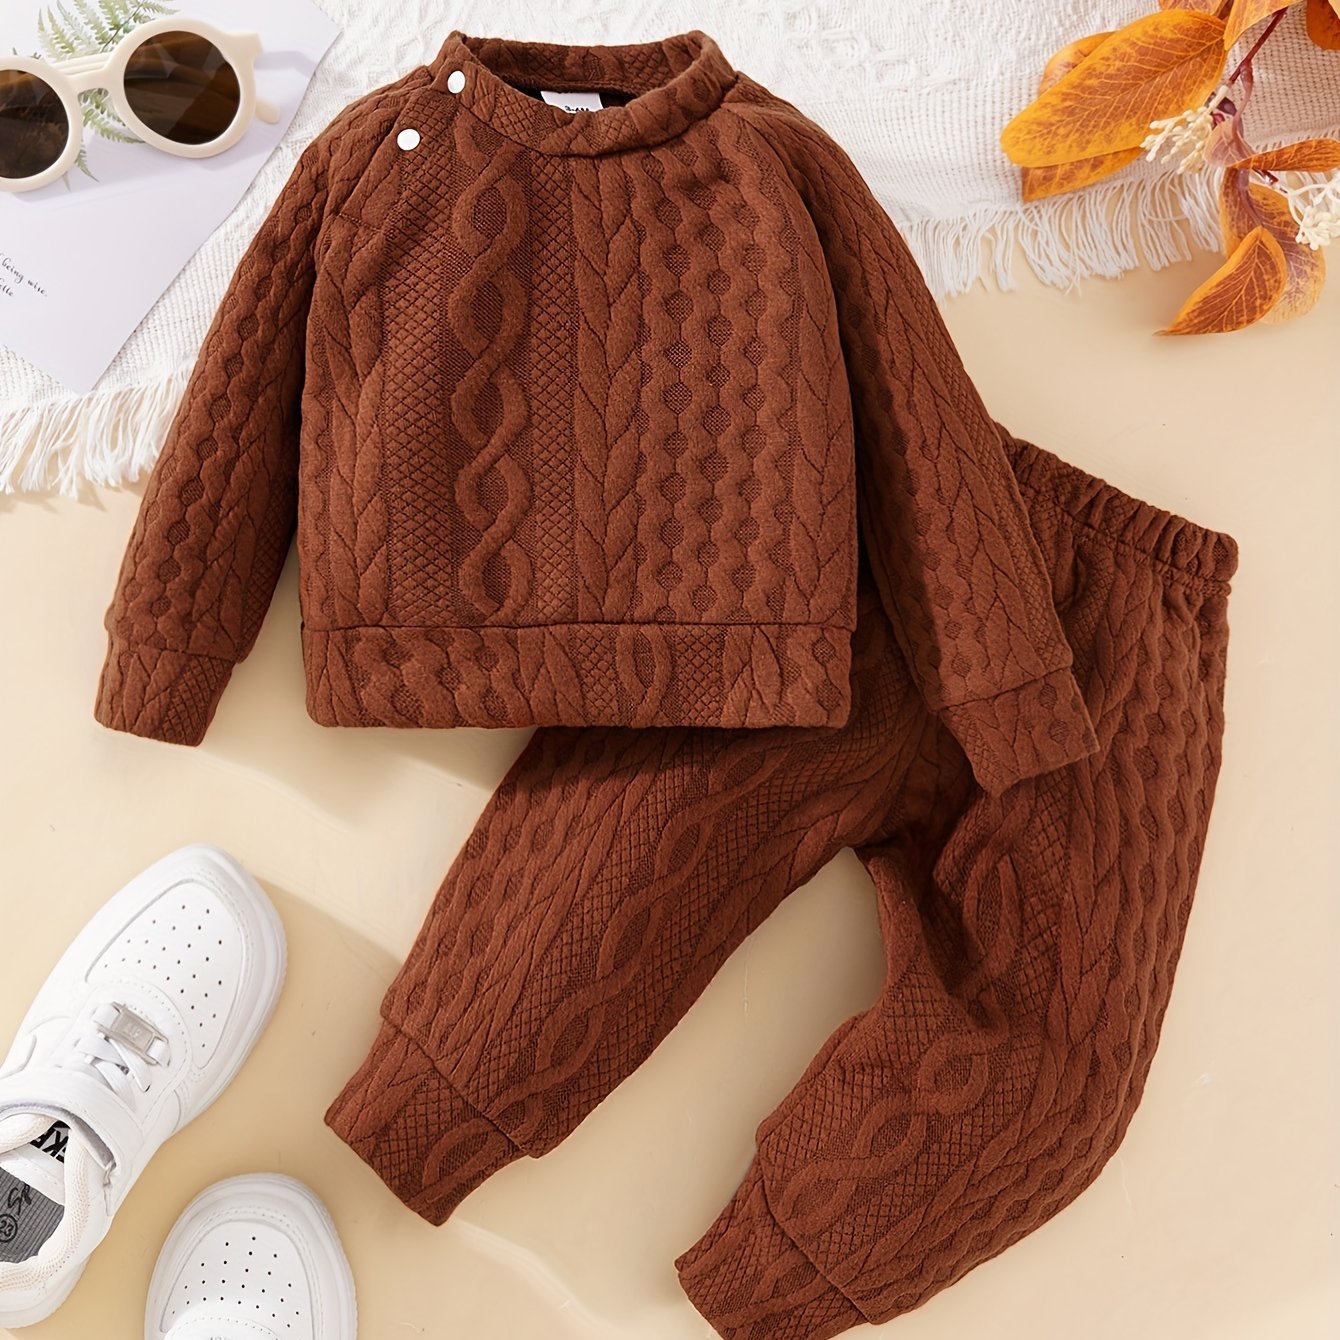 Unisex Baby Girls Boys Cable Knit Sweater Long Sleeve T - Shirt Tops + Pants 2pcs Outfit Fall Winter Warm Clothes - Ammpoure Wellbeing